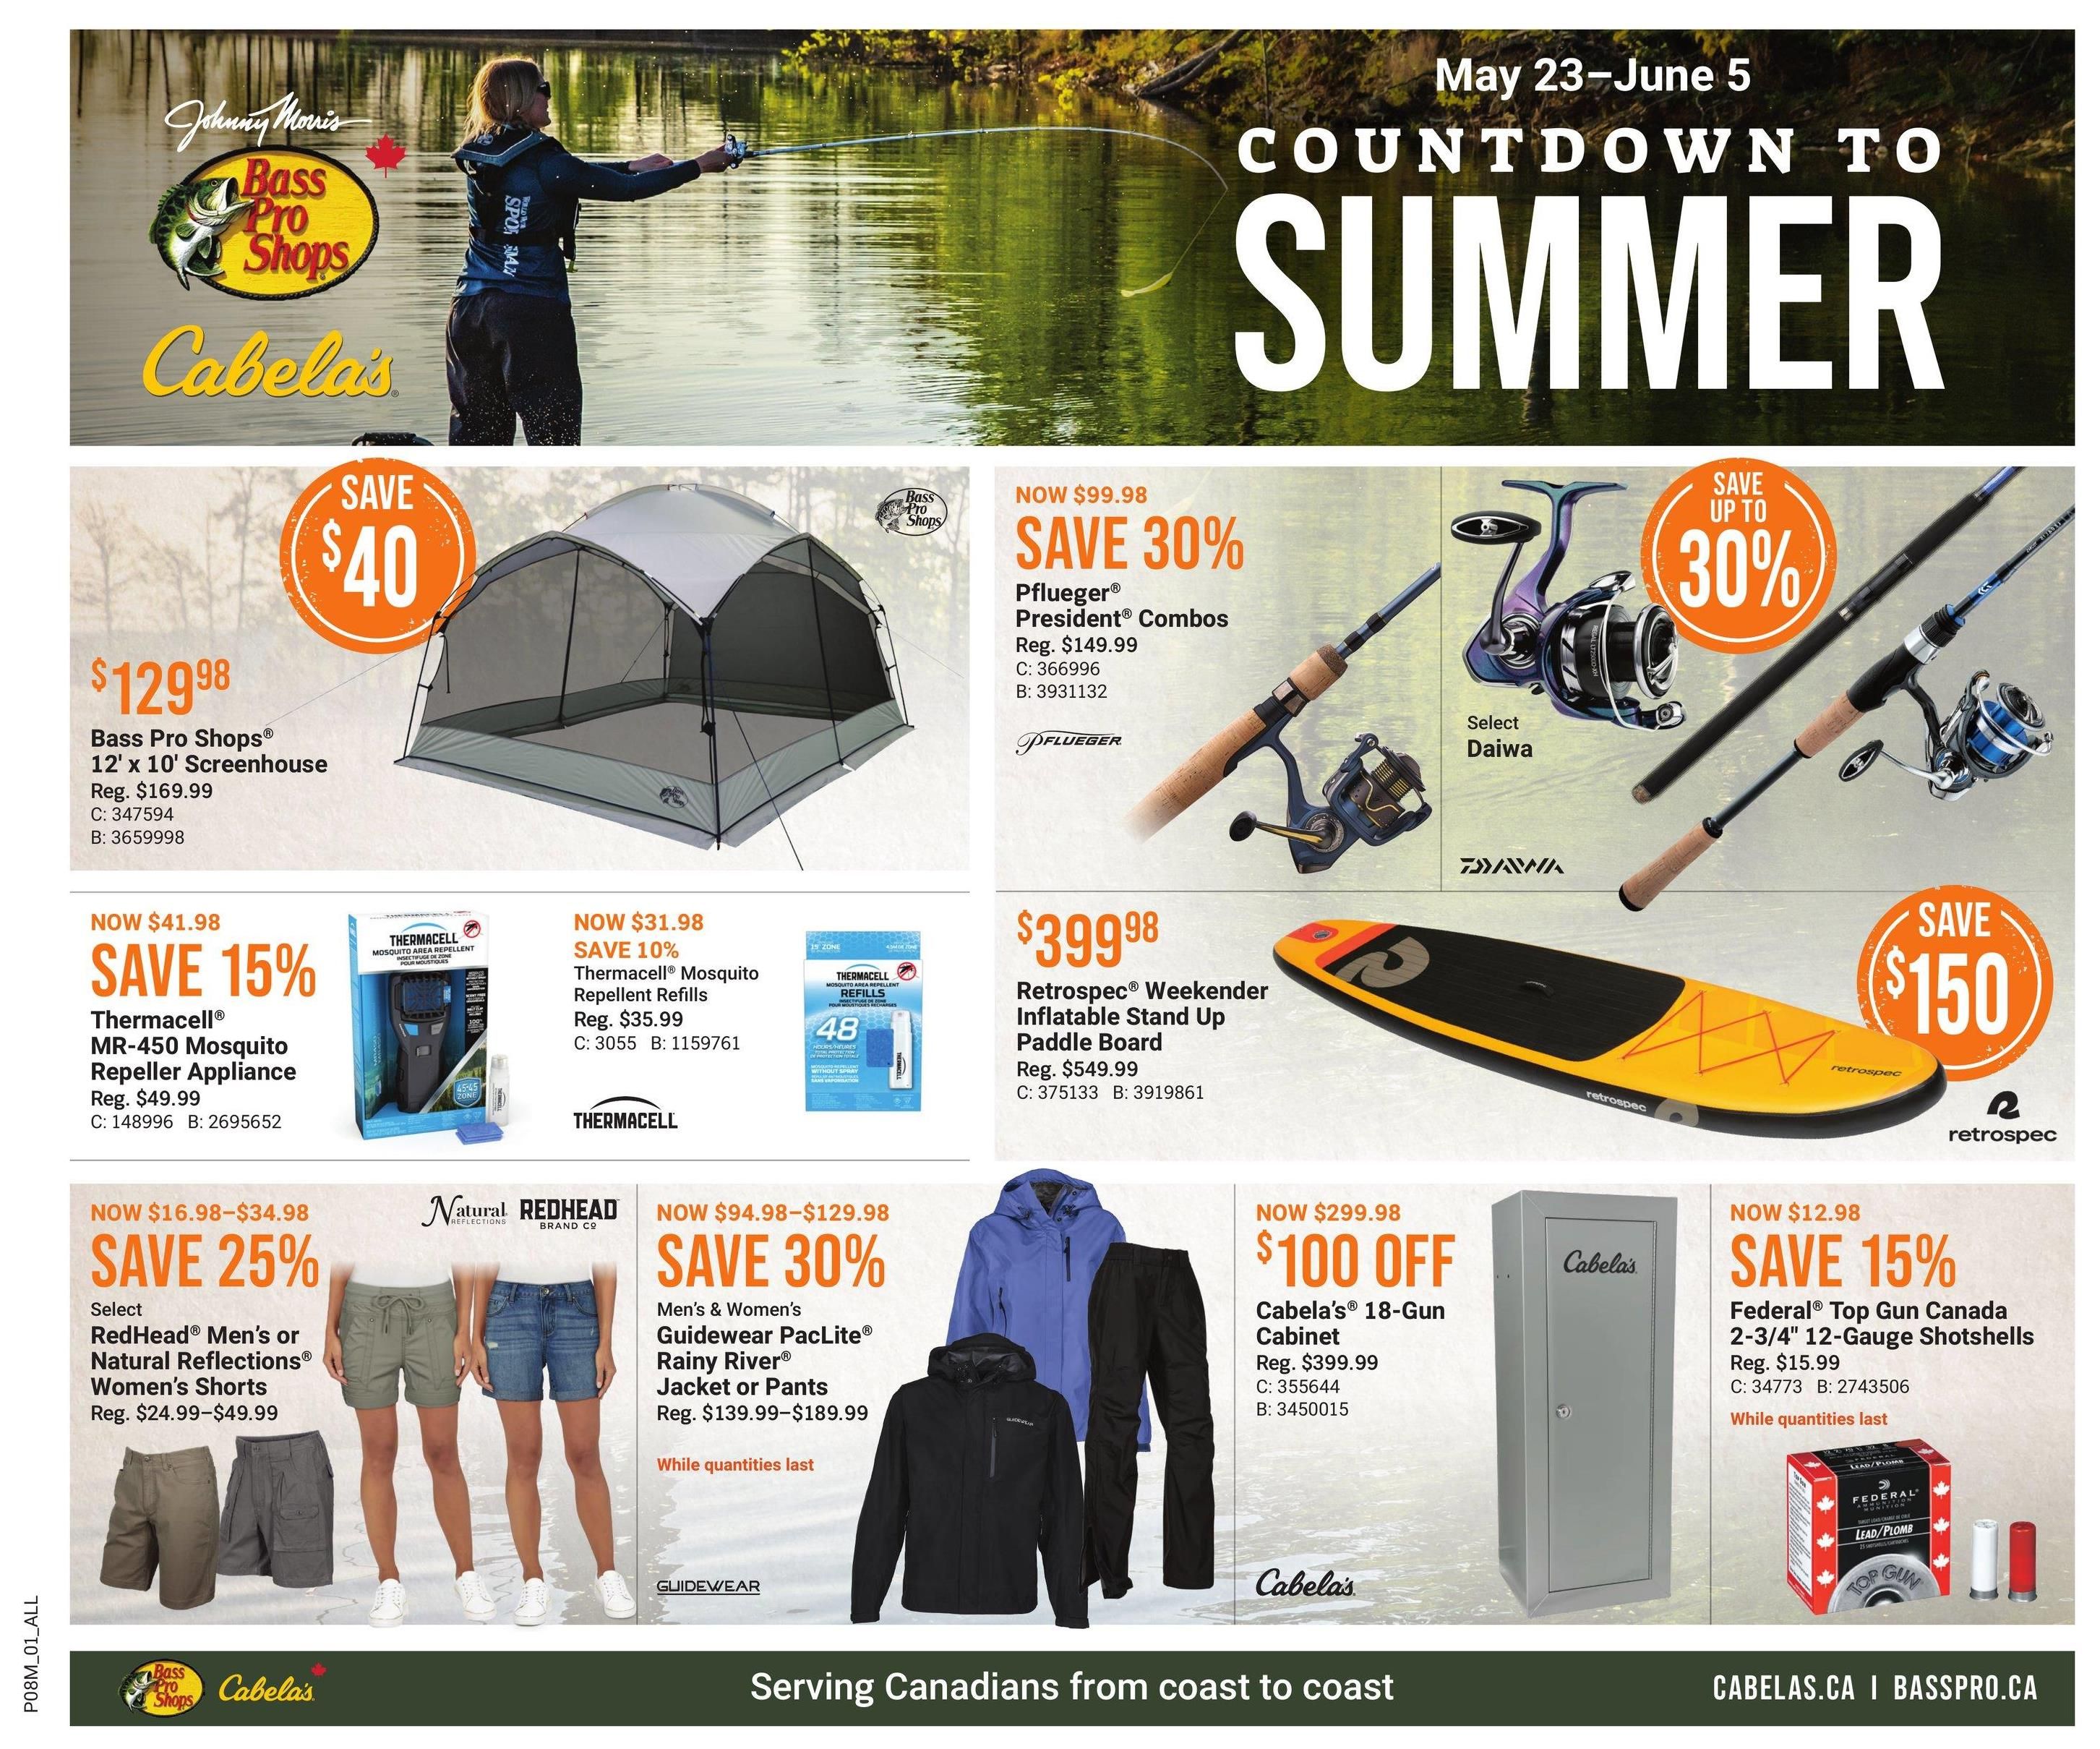 Cabela's - Countdown to Summer